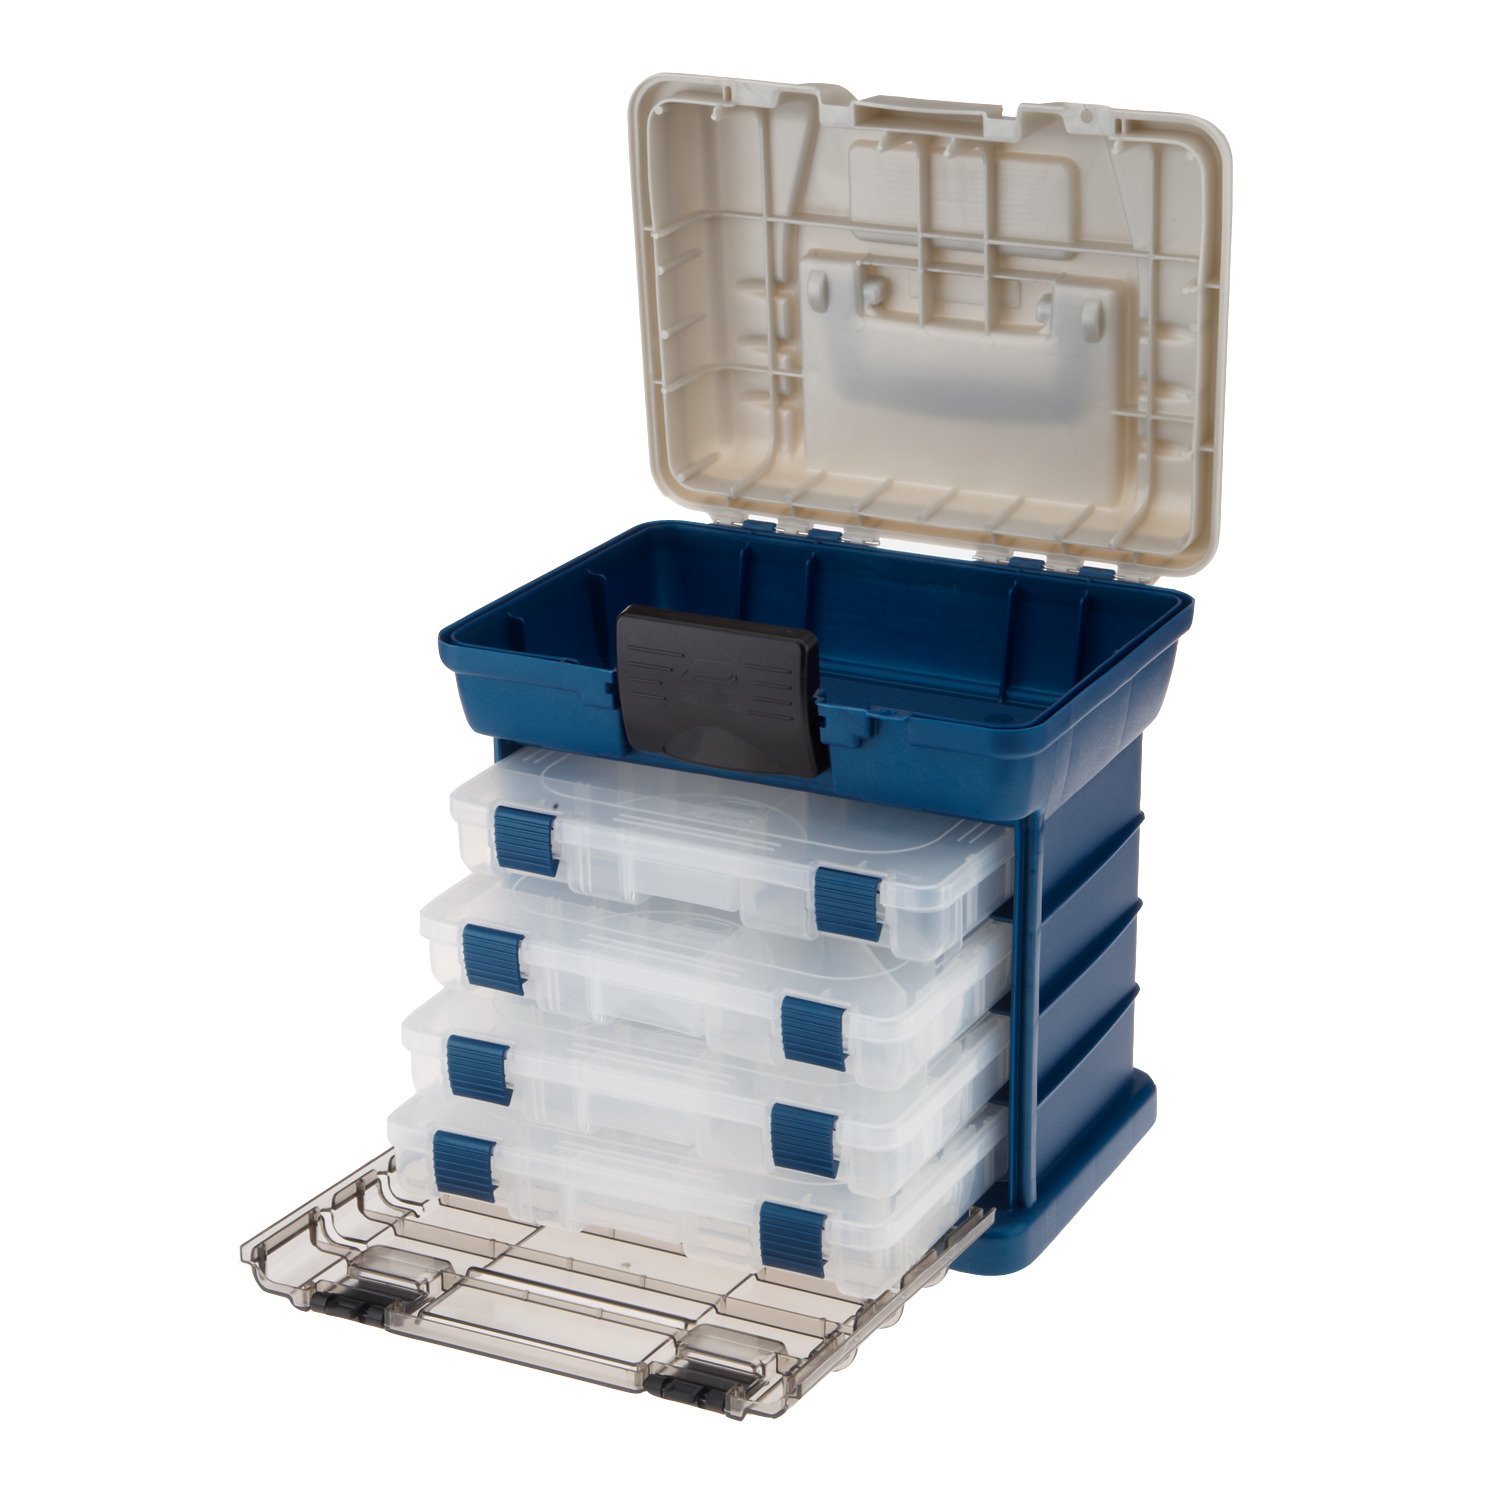 Plano 4-BY 3600 StowAway Rack System - Blue/Silver [136400]